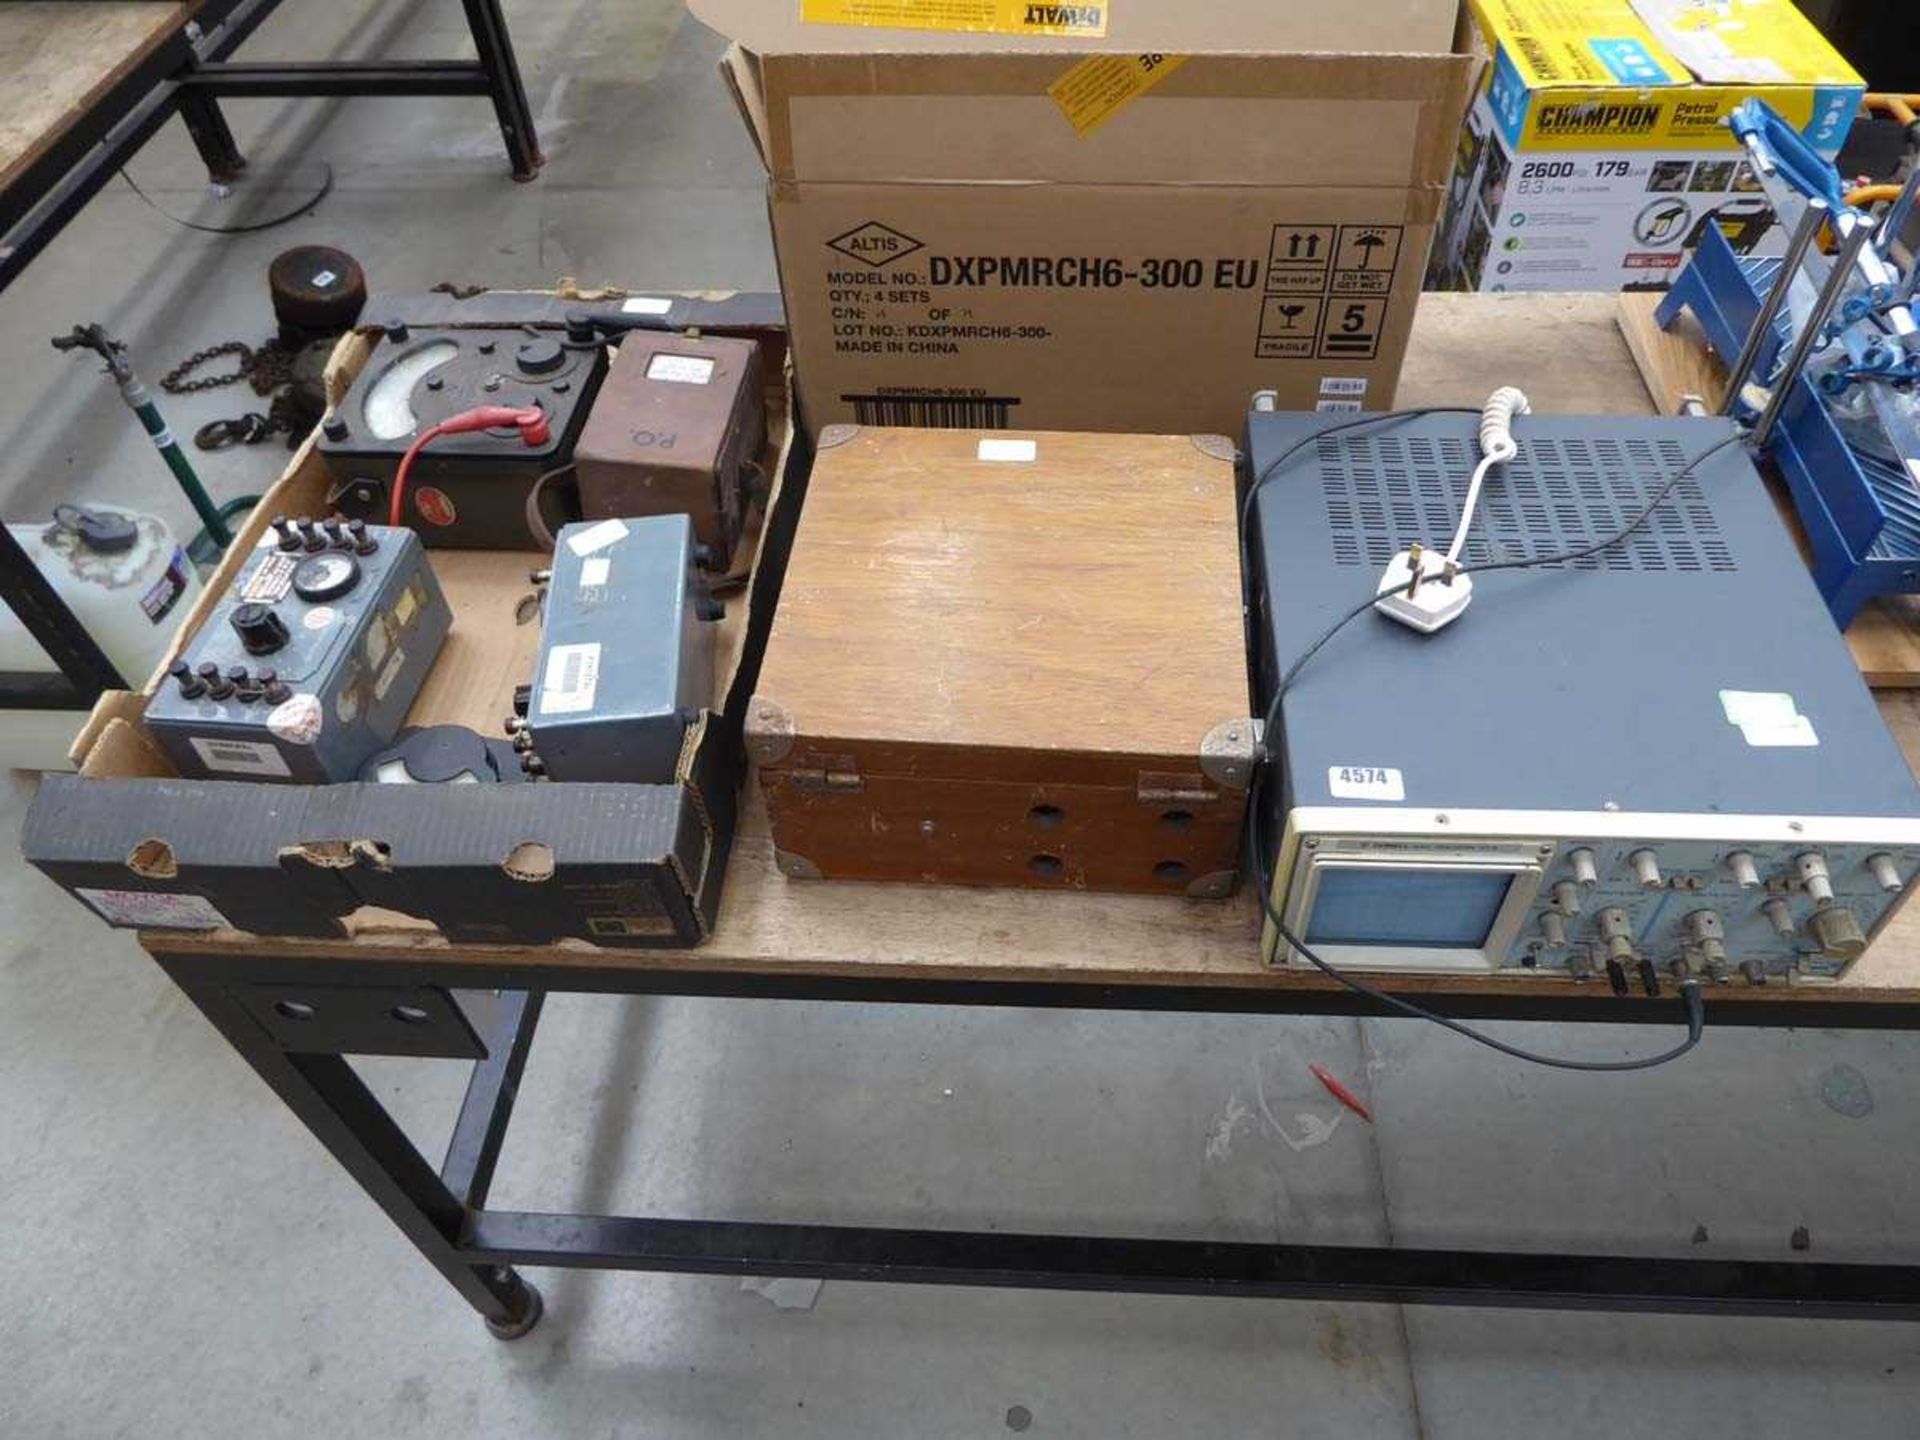 Oscilloscope, loop tester and box of various other testers